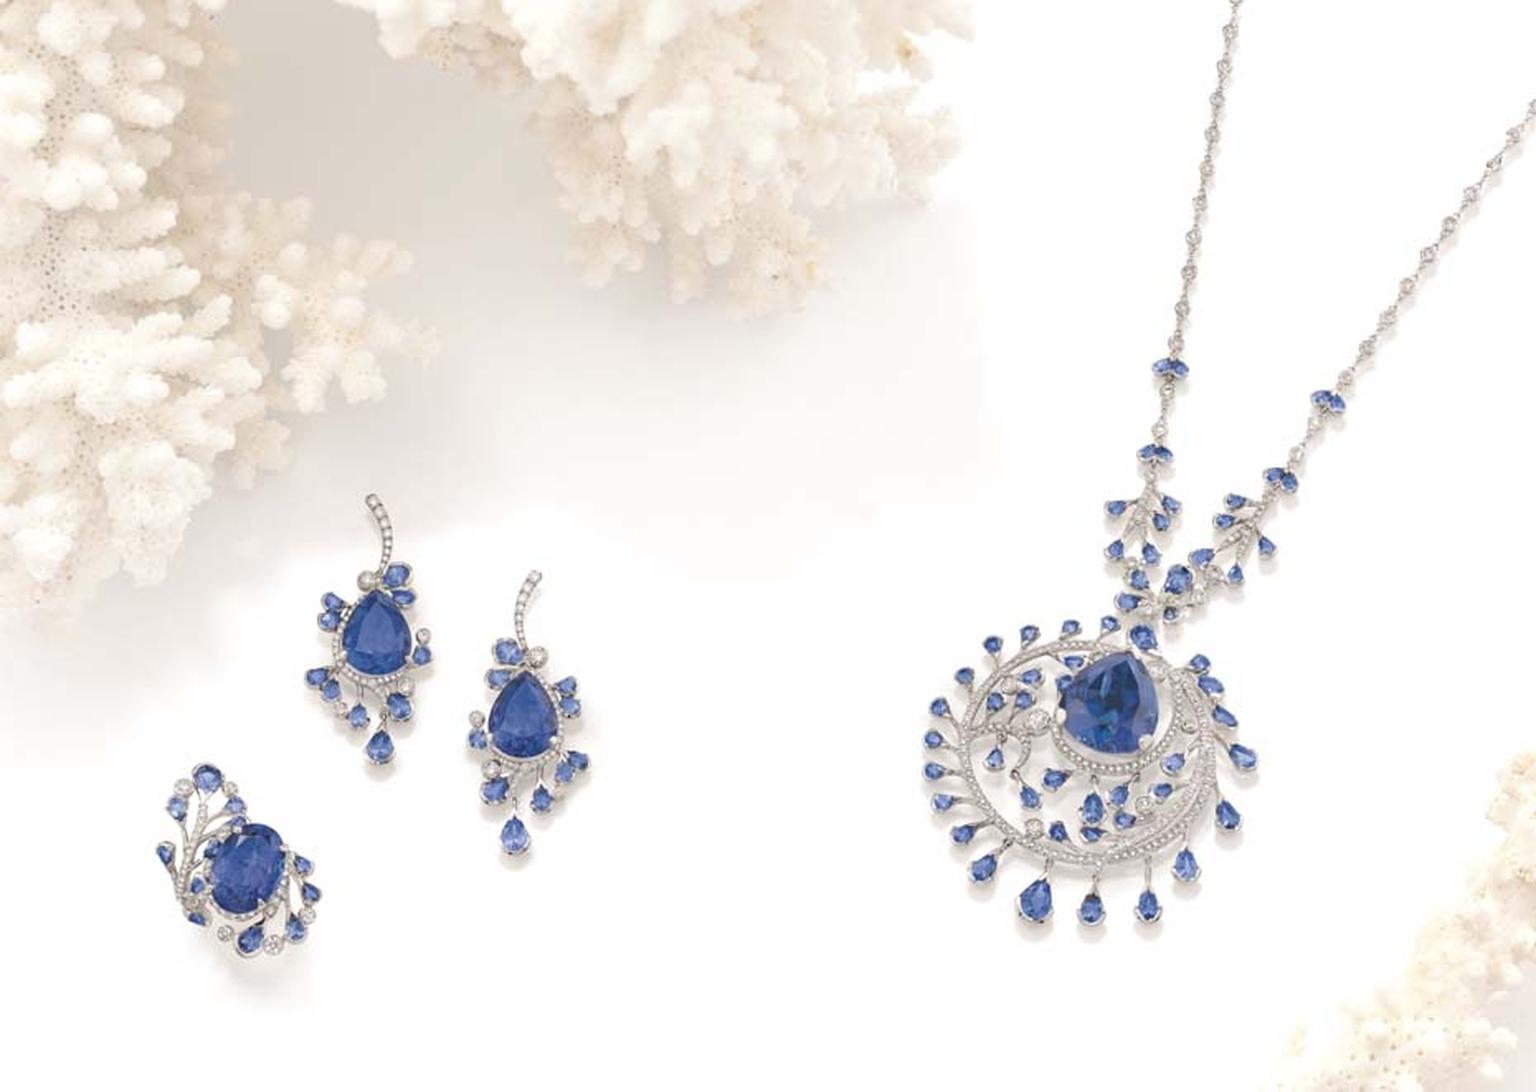 Boodles Ocean of Dreams suite with tanzanite and diamonds, from the new 'Ocean of Dreams' collection.